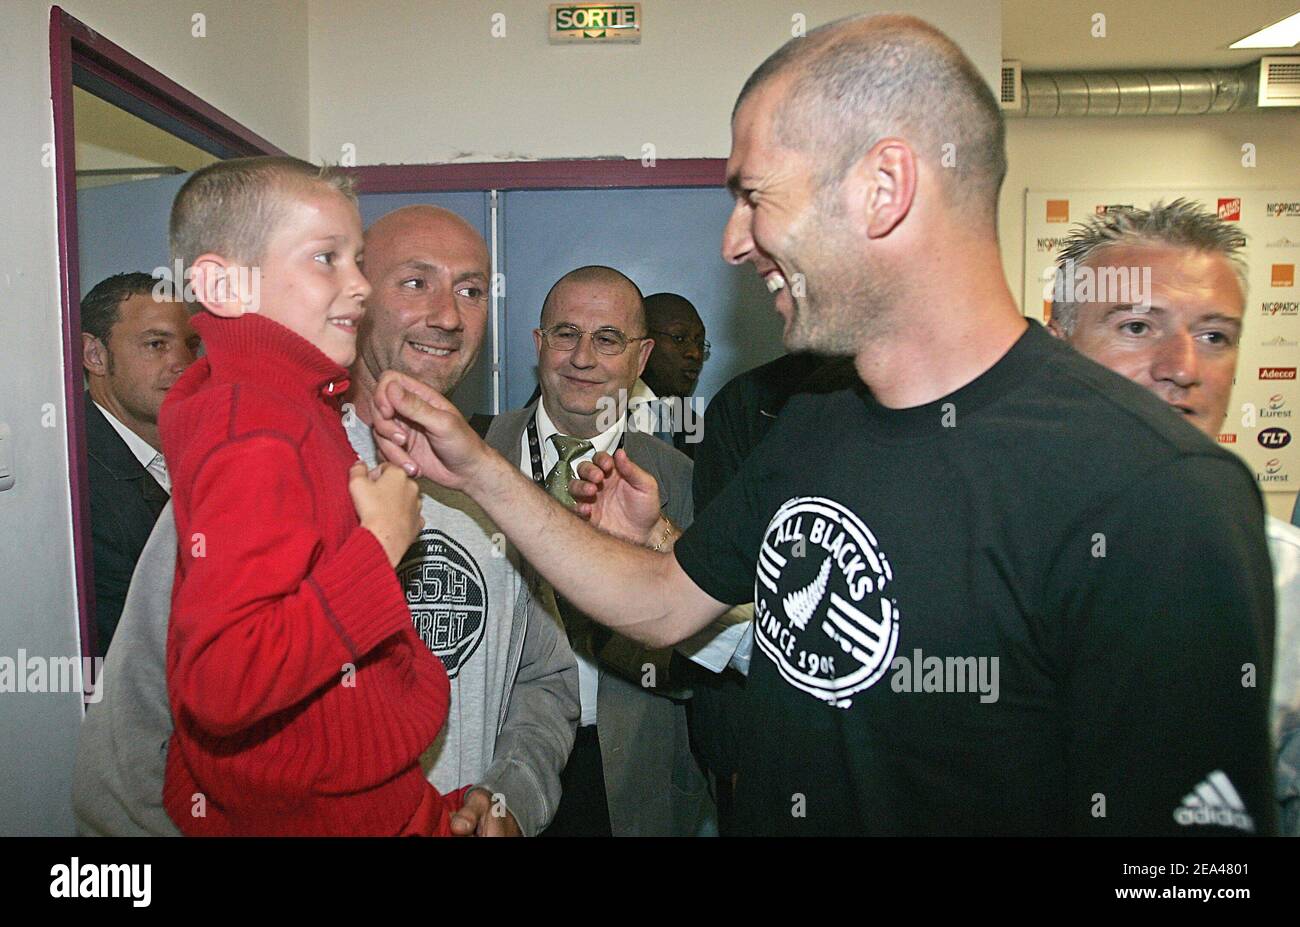 French national goalkeeper Fabien Barthez (L) with a sick child in his ...